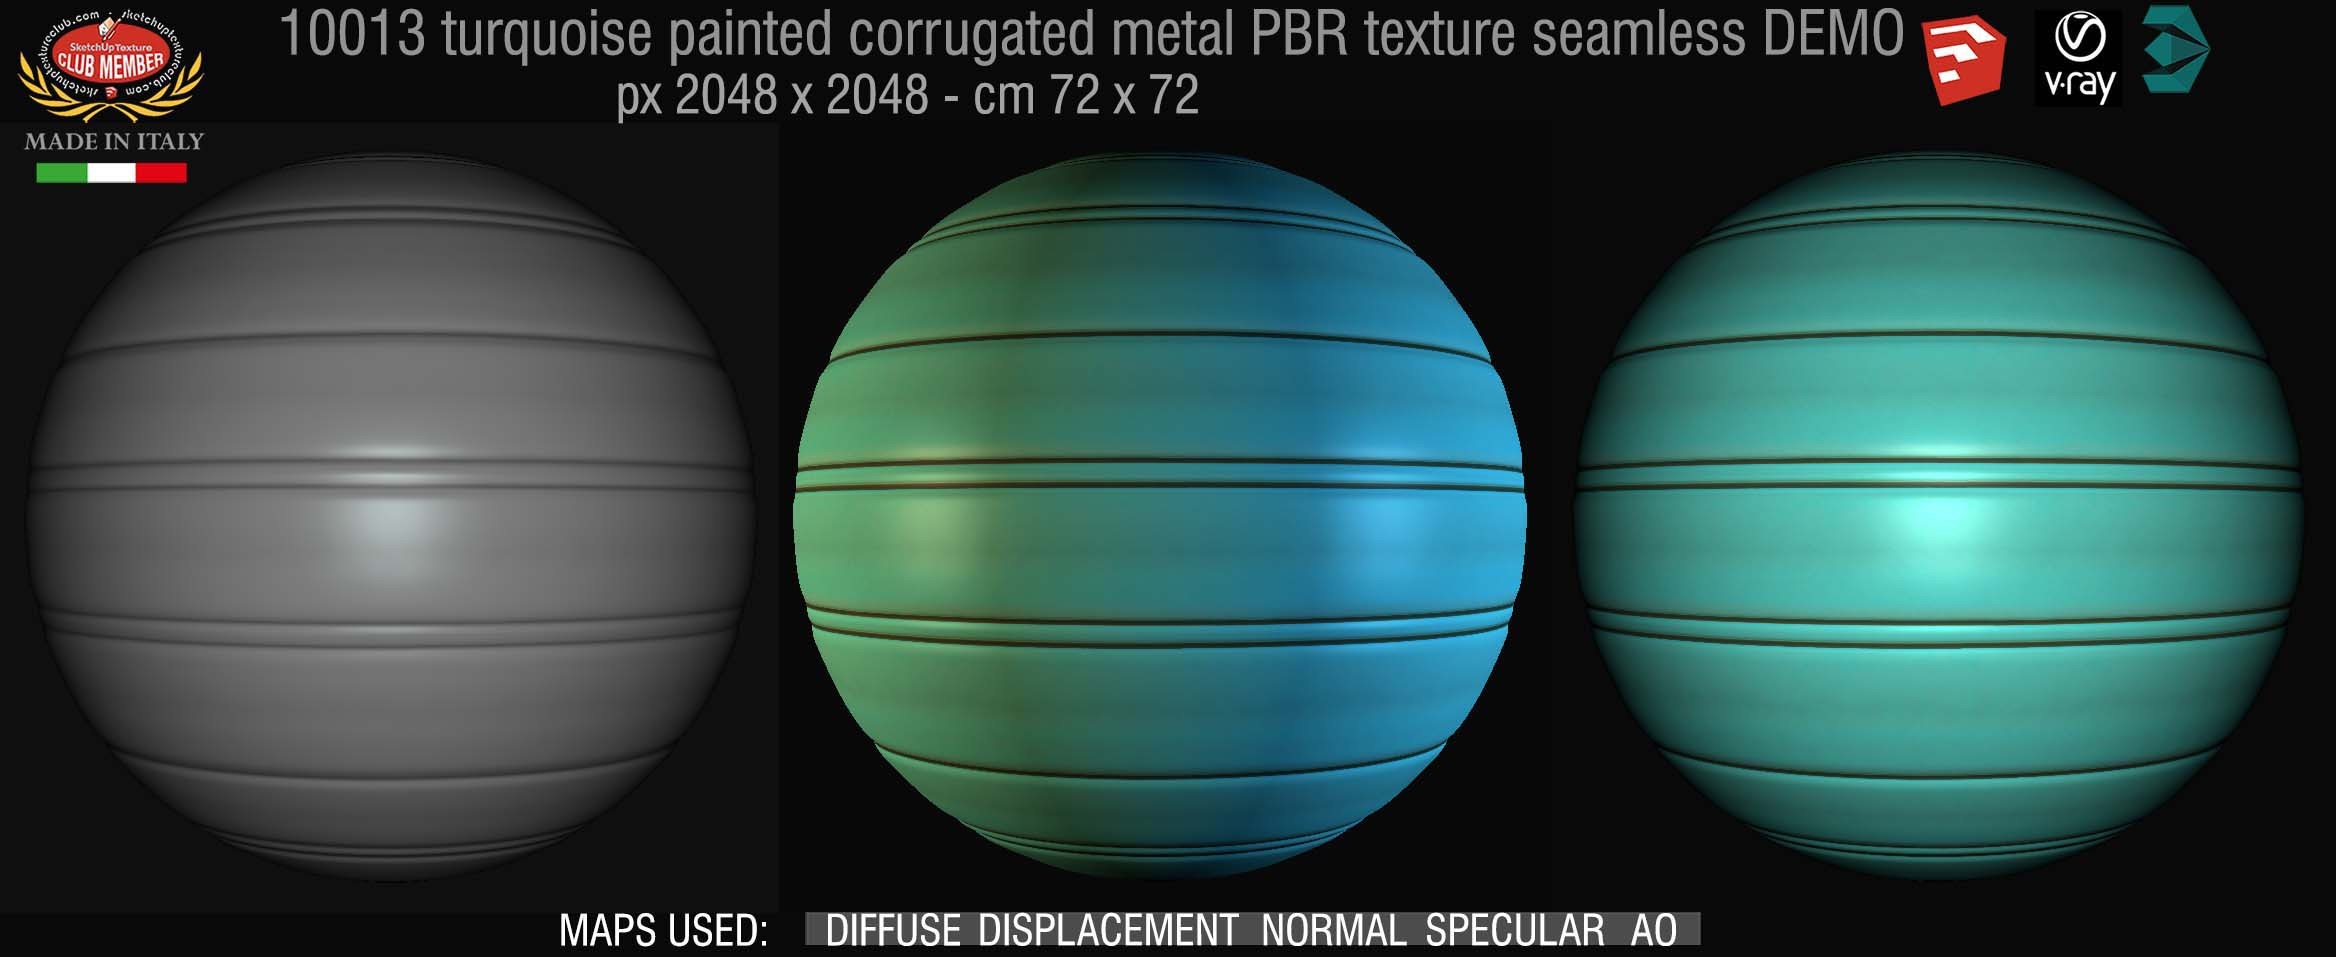 10013 Turquoise painted corrugated metal PBR texture seamless DEMO